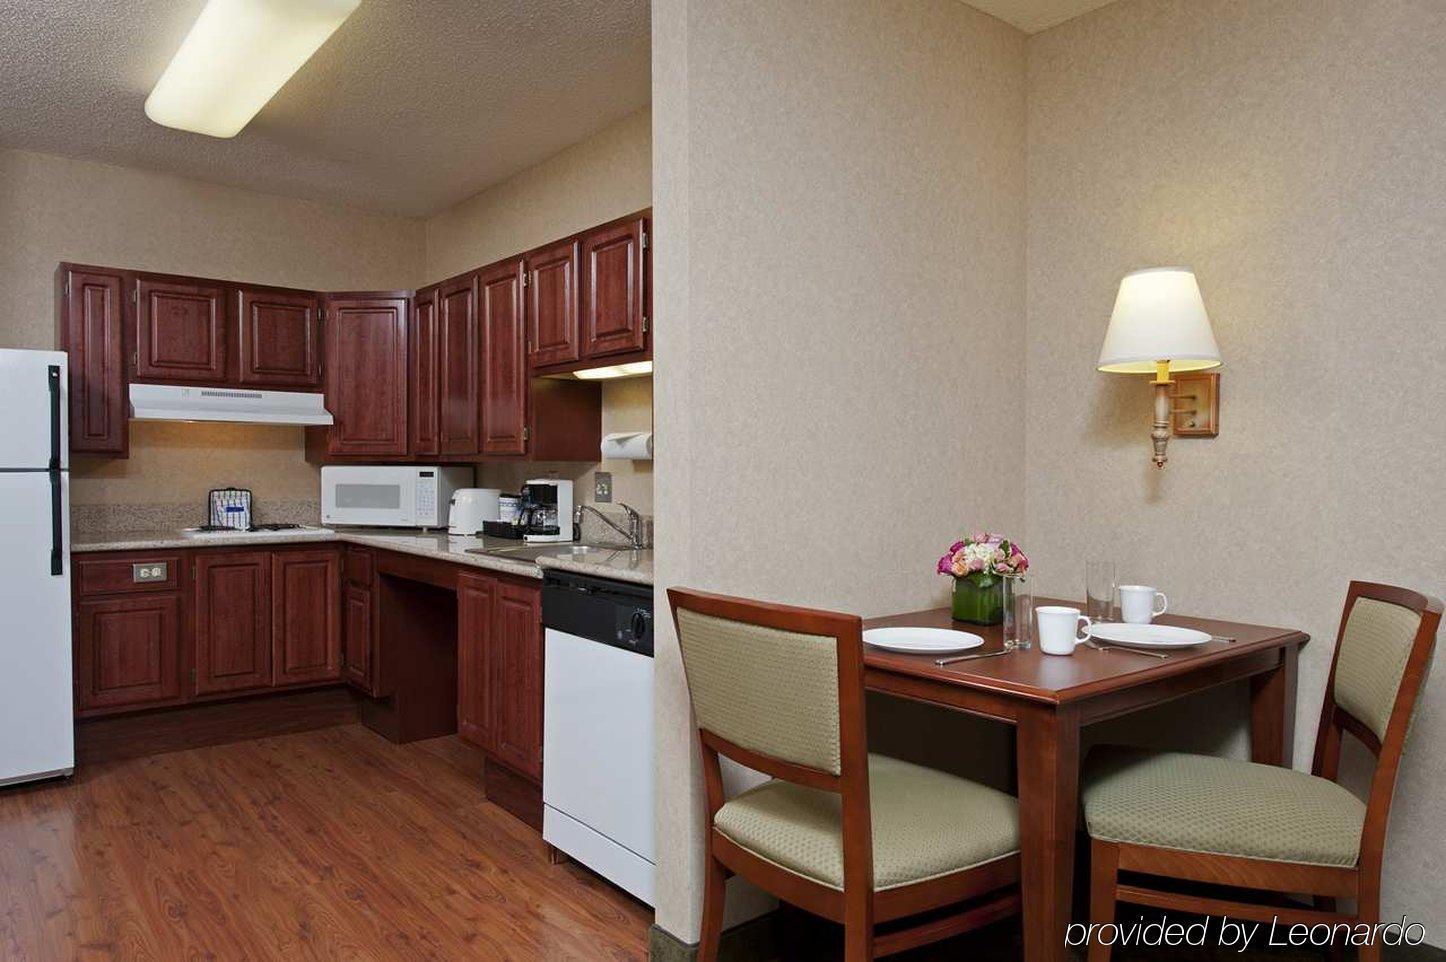 Homewood Suites By Hilton Chicago Downtown Camera foto